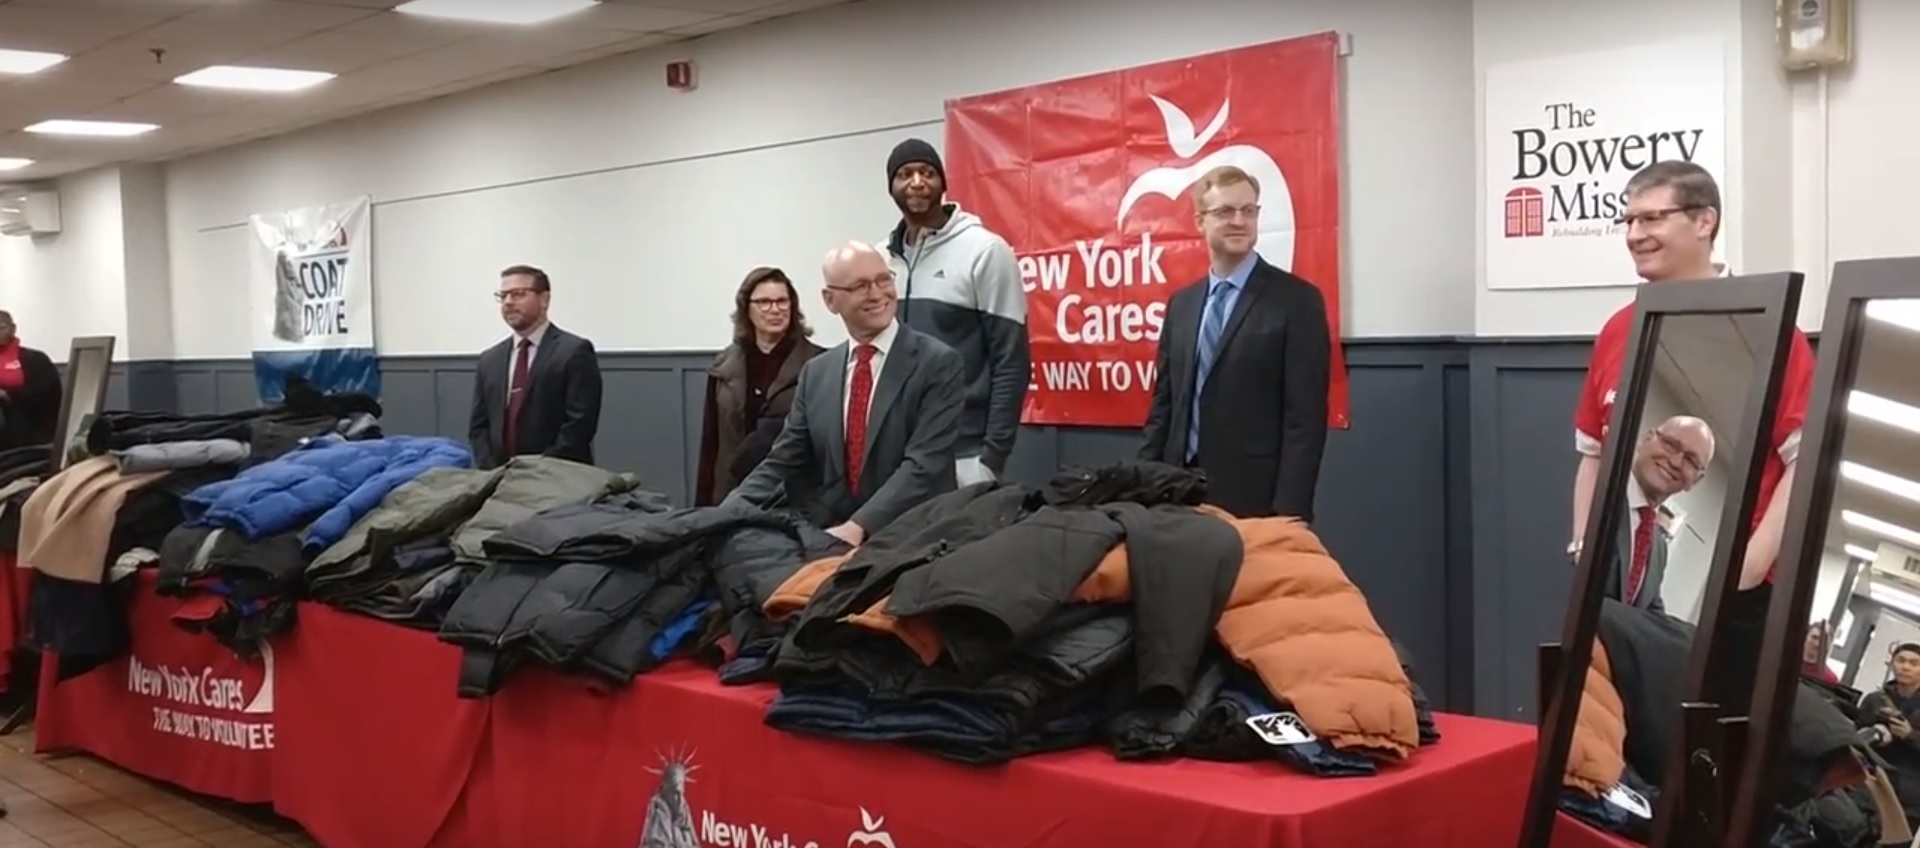 Coat Drive for the Homeless Provides Warmth Against the Cold